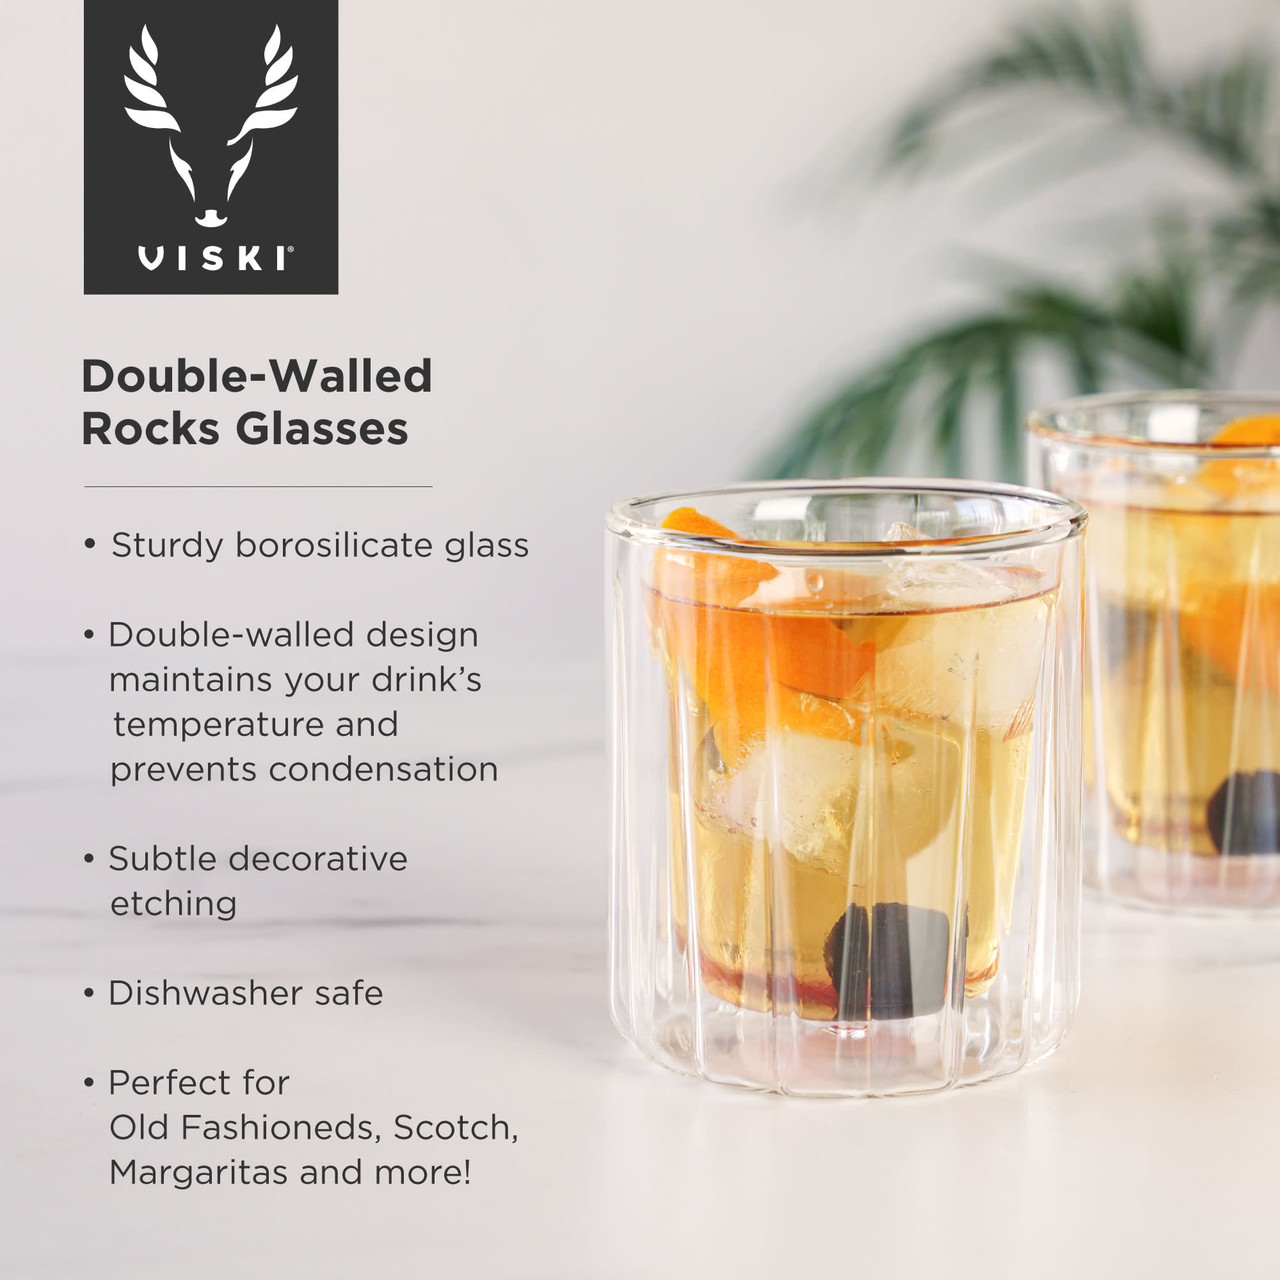 https://cdn11.bigcommerce.com/s-oo0gdojvjo/images/stencil/1280x1280/products/68635/101717/double-walled-rocks-glasses-by-viski-set-of-2-3__45913.1683797281.jpg?c=2&imbypass=on